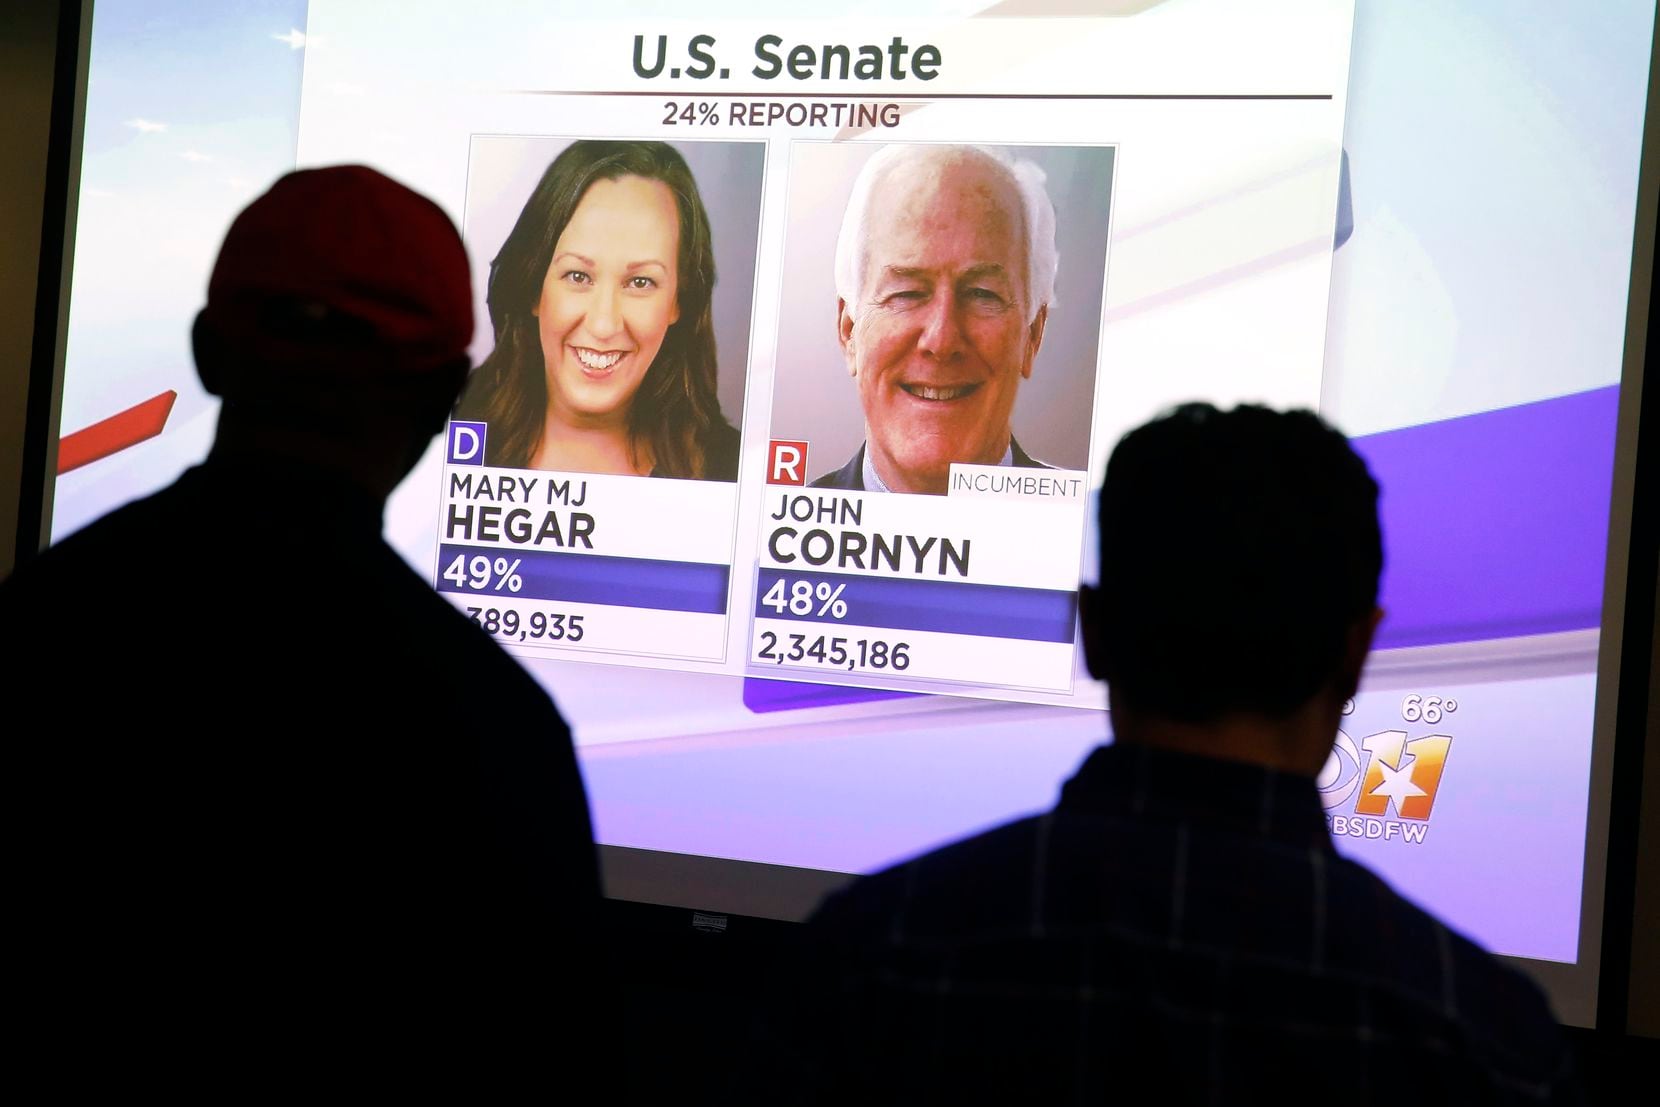 Early Texas Senate returns between R-John Cornyn and D- Mary MJ Hegar are shown on a screen during the Tarrant County GOP election night party at the Hurst Conference Center in Hurst, Texas, Tuesday, November 3, 2020. (Tom Fox/The Dallas Morning News) 